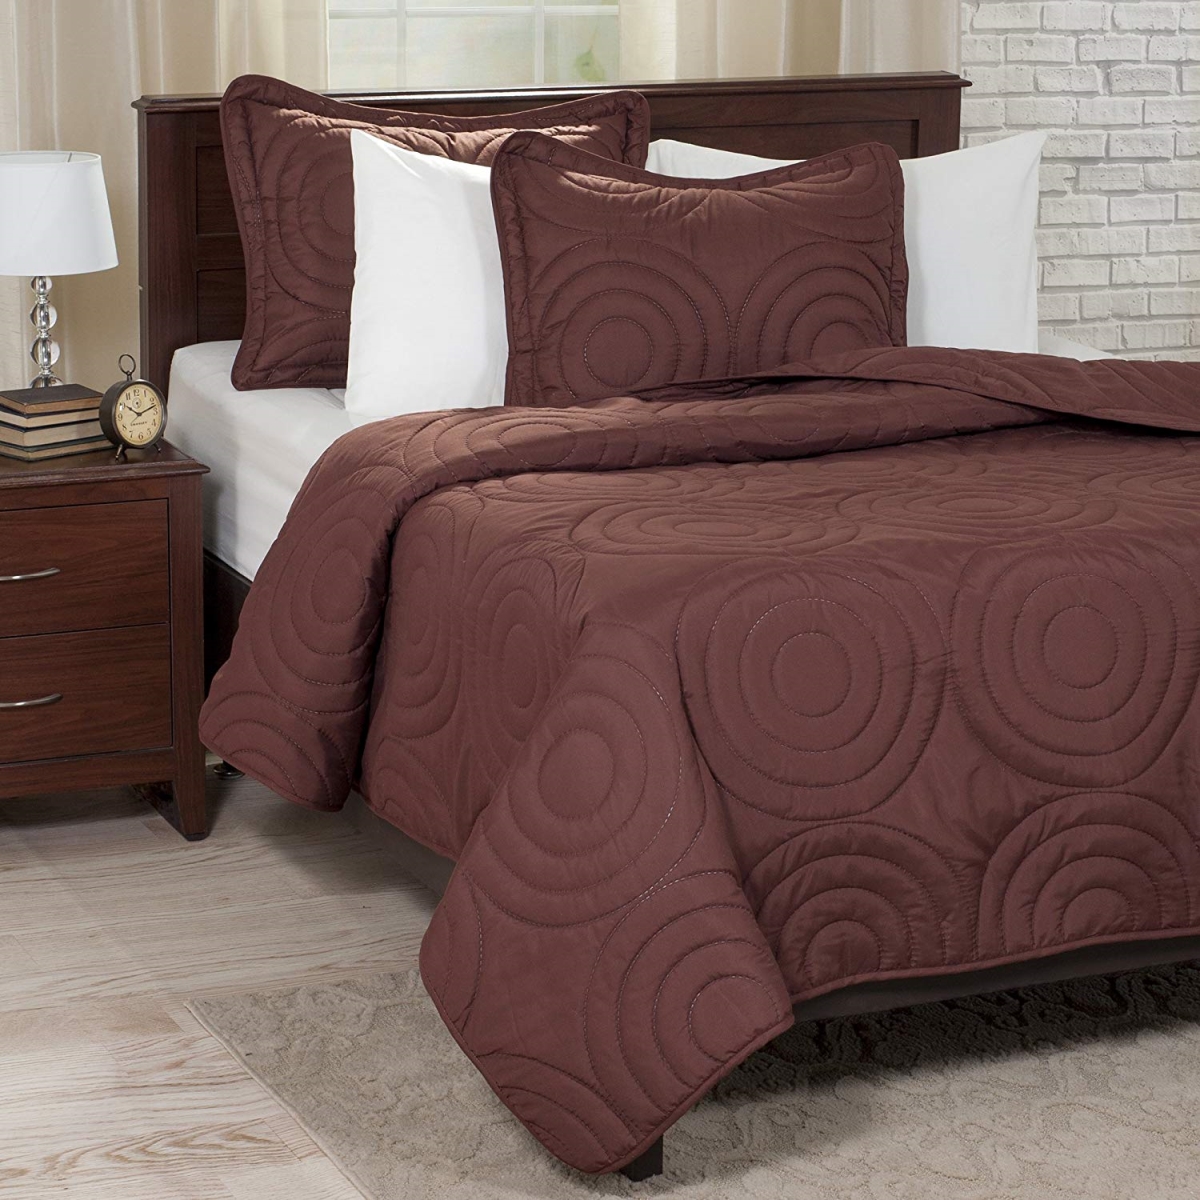 66a-01950 Solid Embossed 3 Piece Quilt Set, King Size - Chocolate